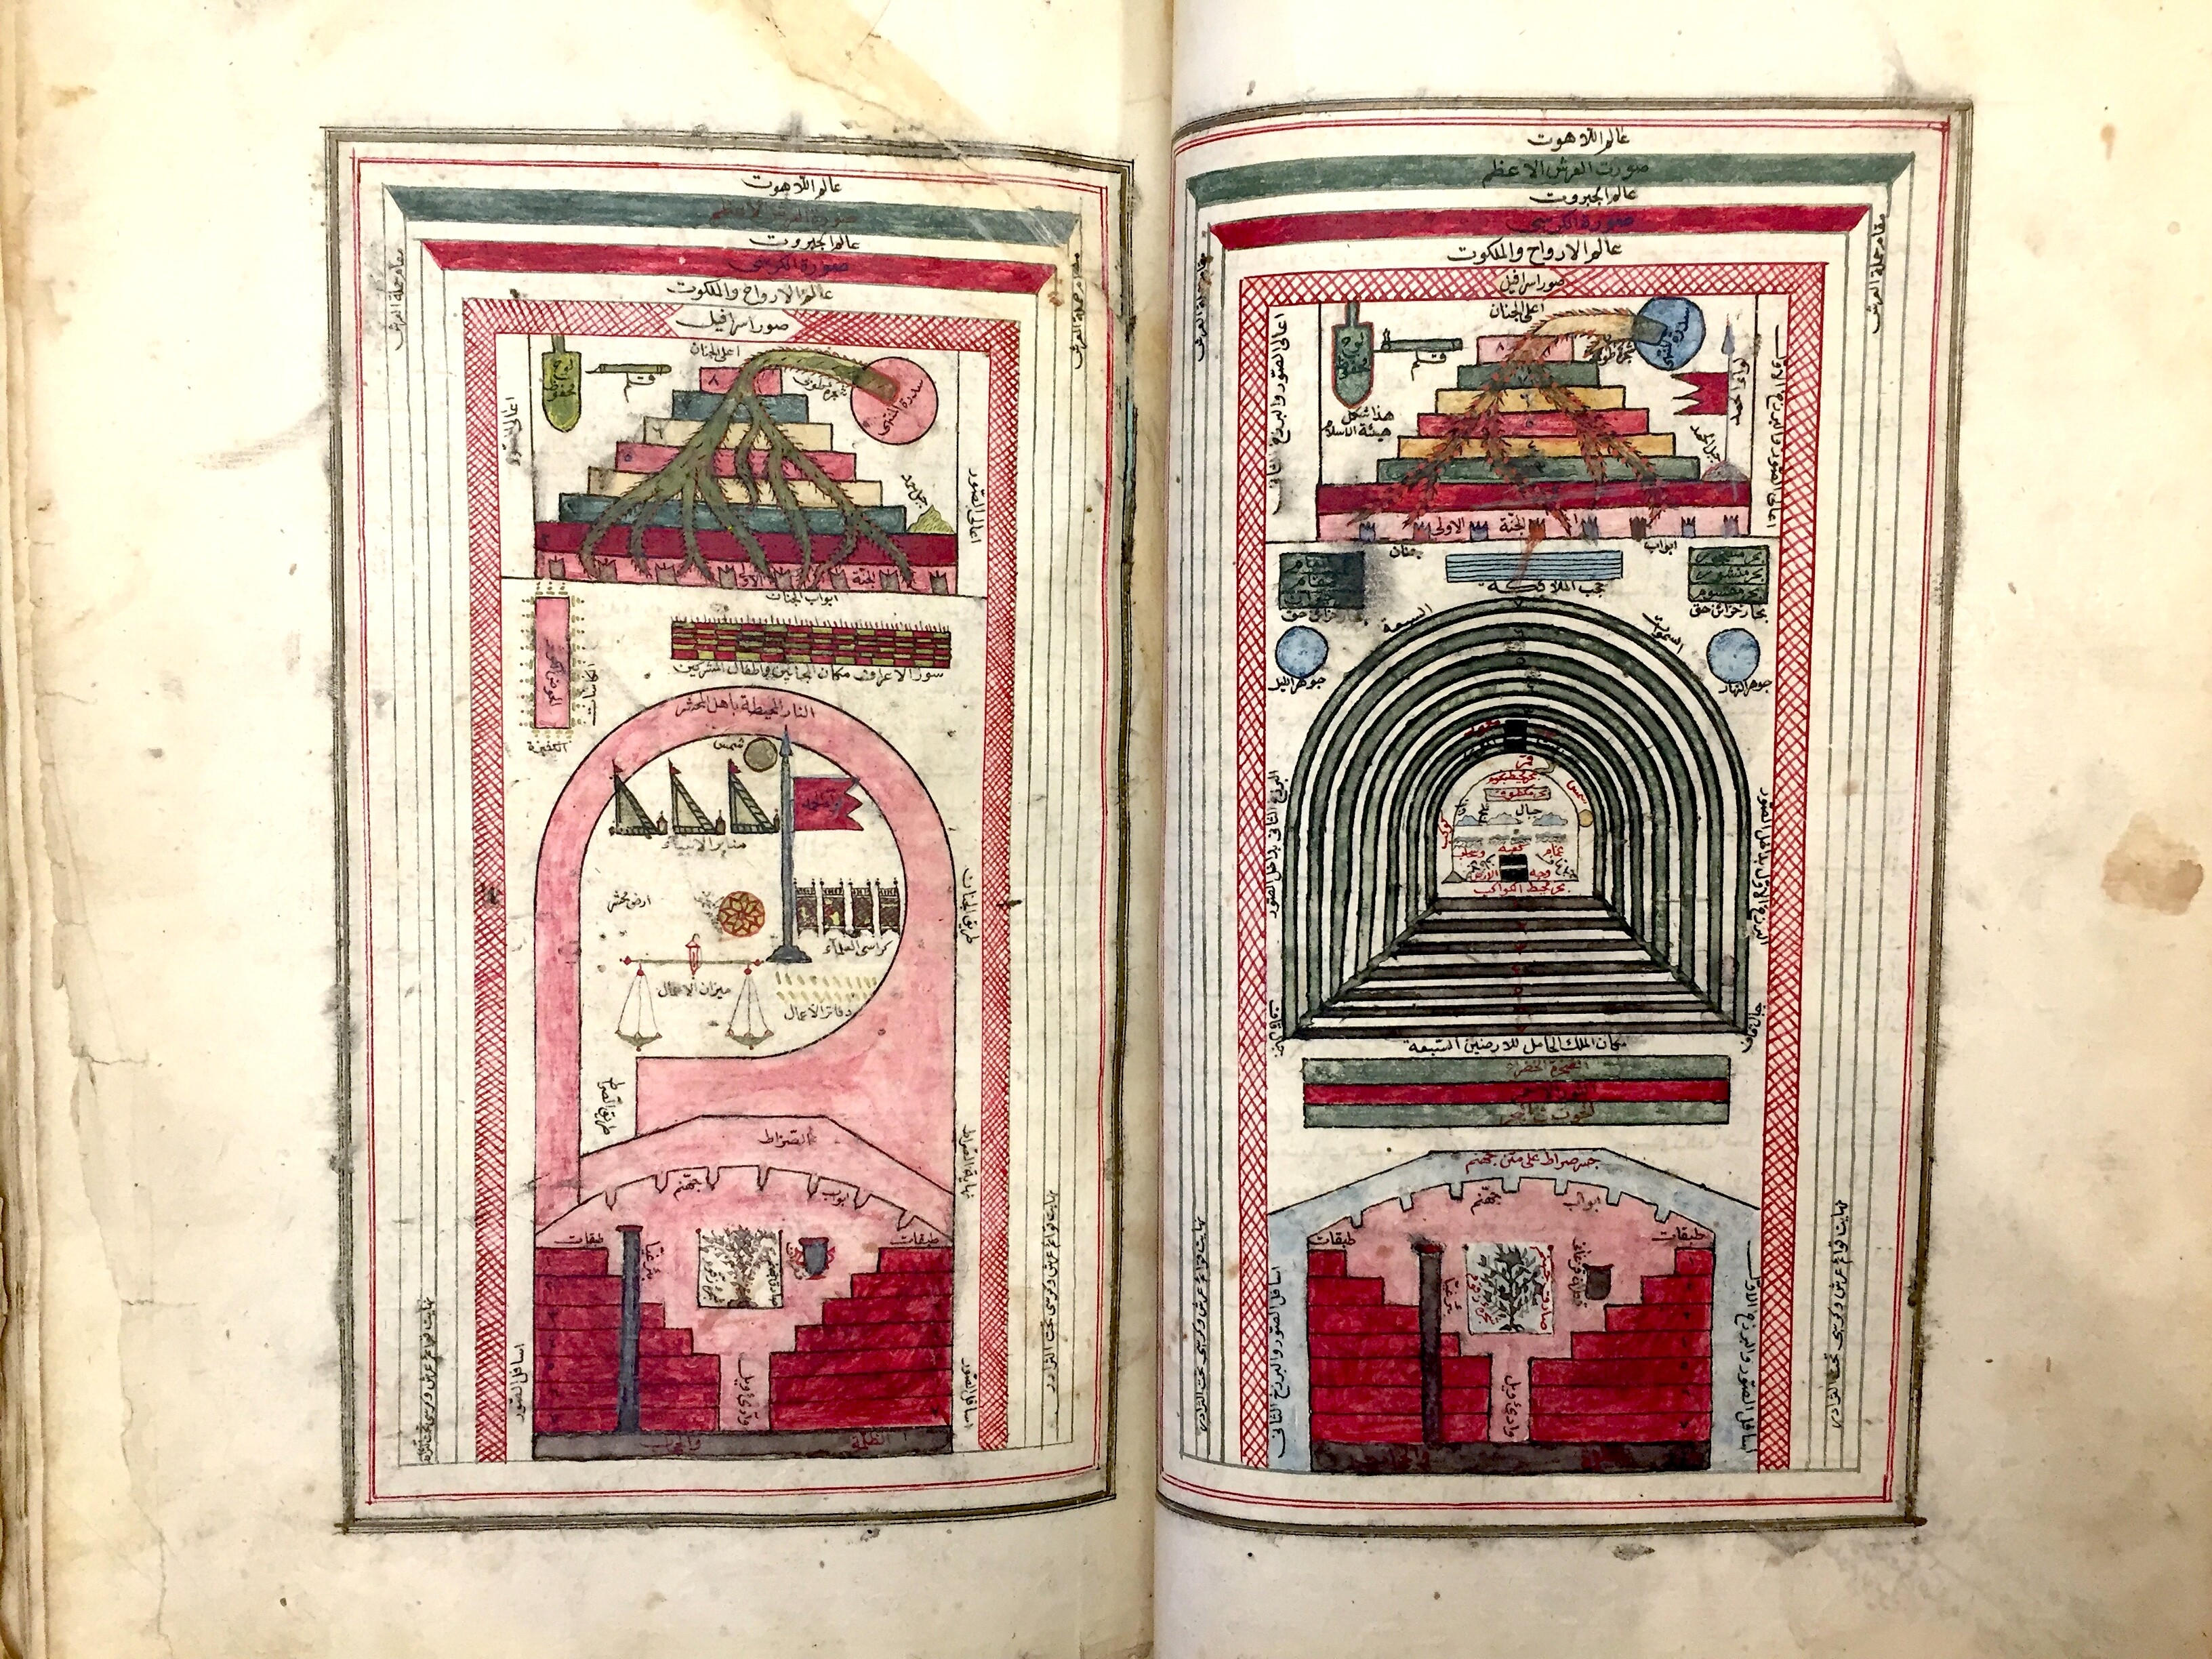 Two manuscript pages featuring drawings of the Ka‘bah.